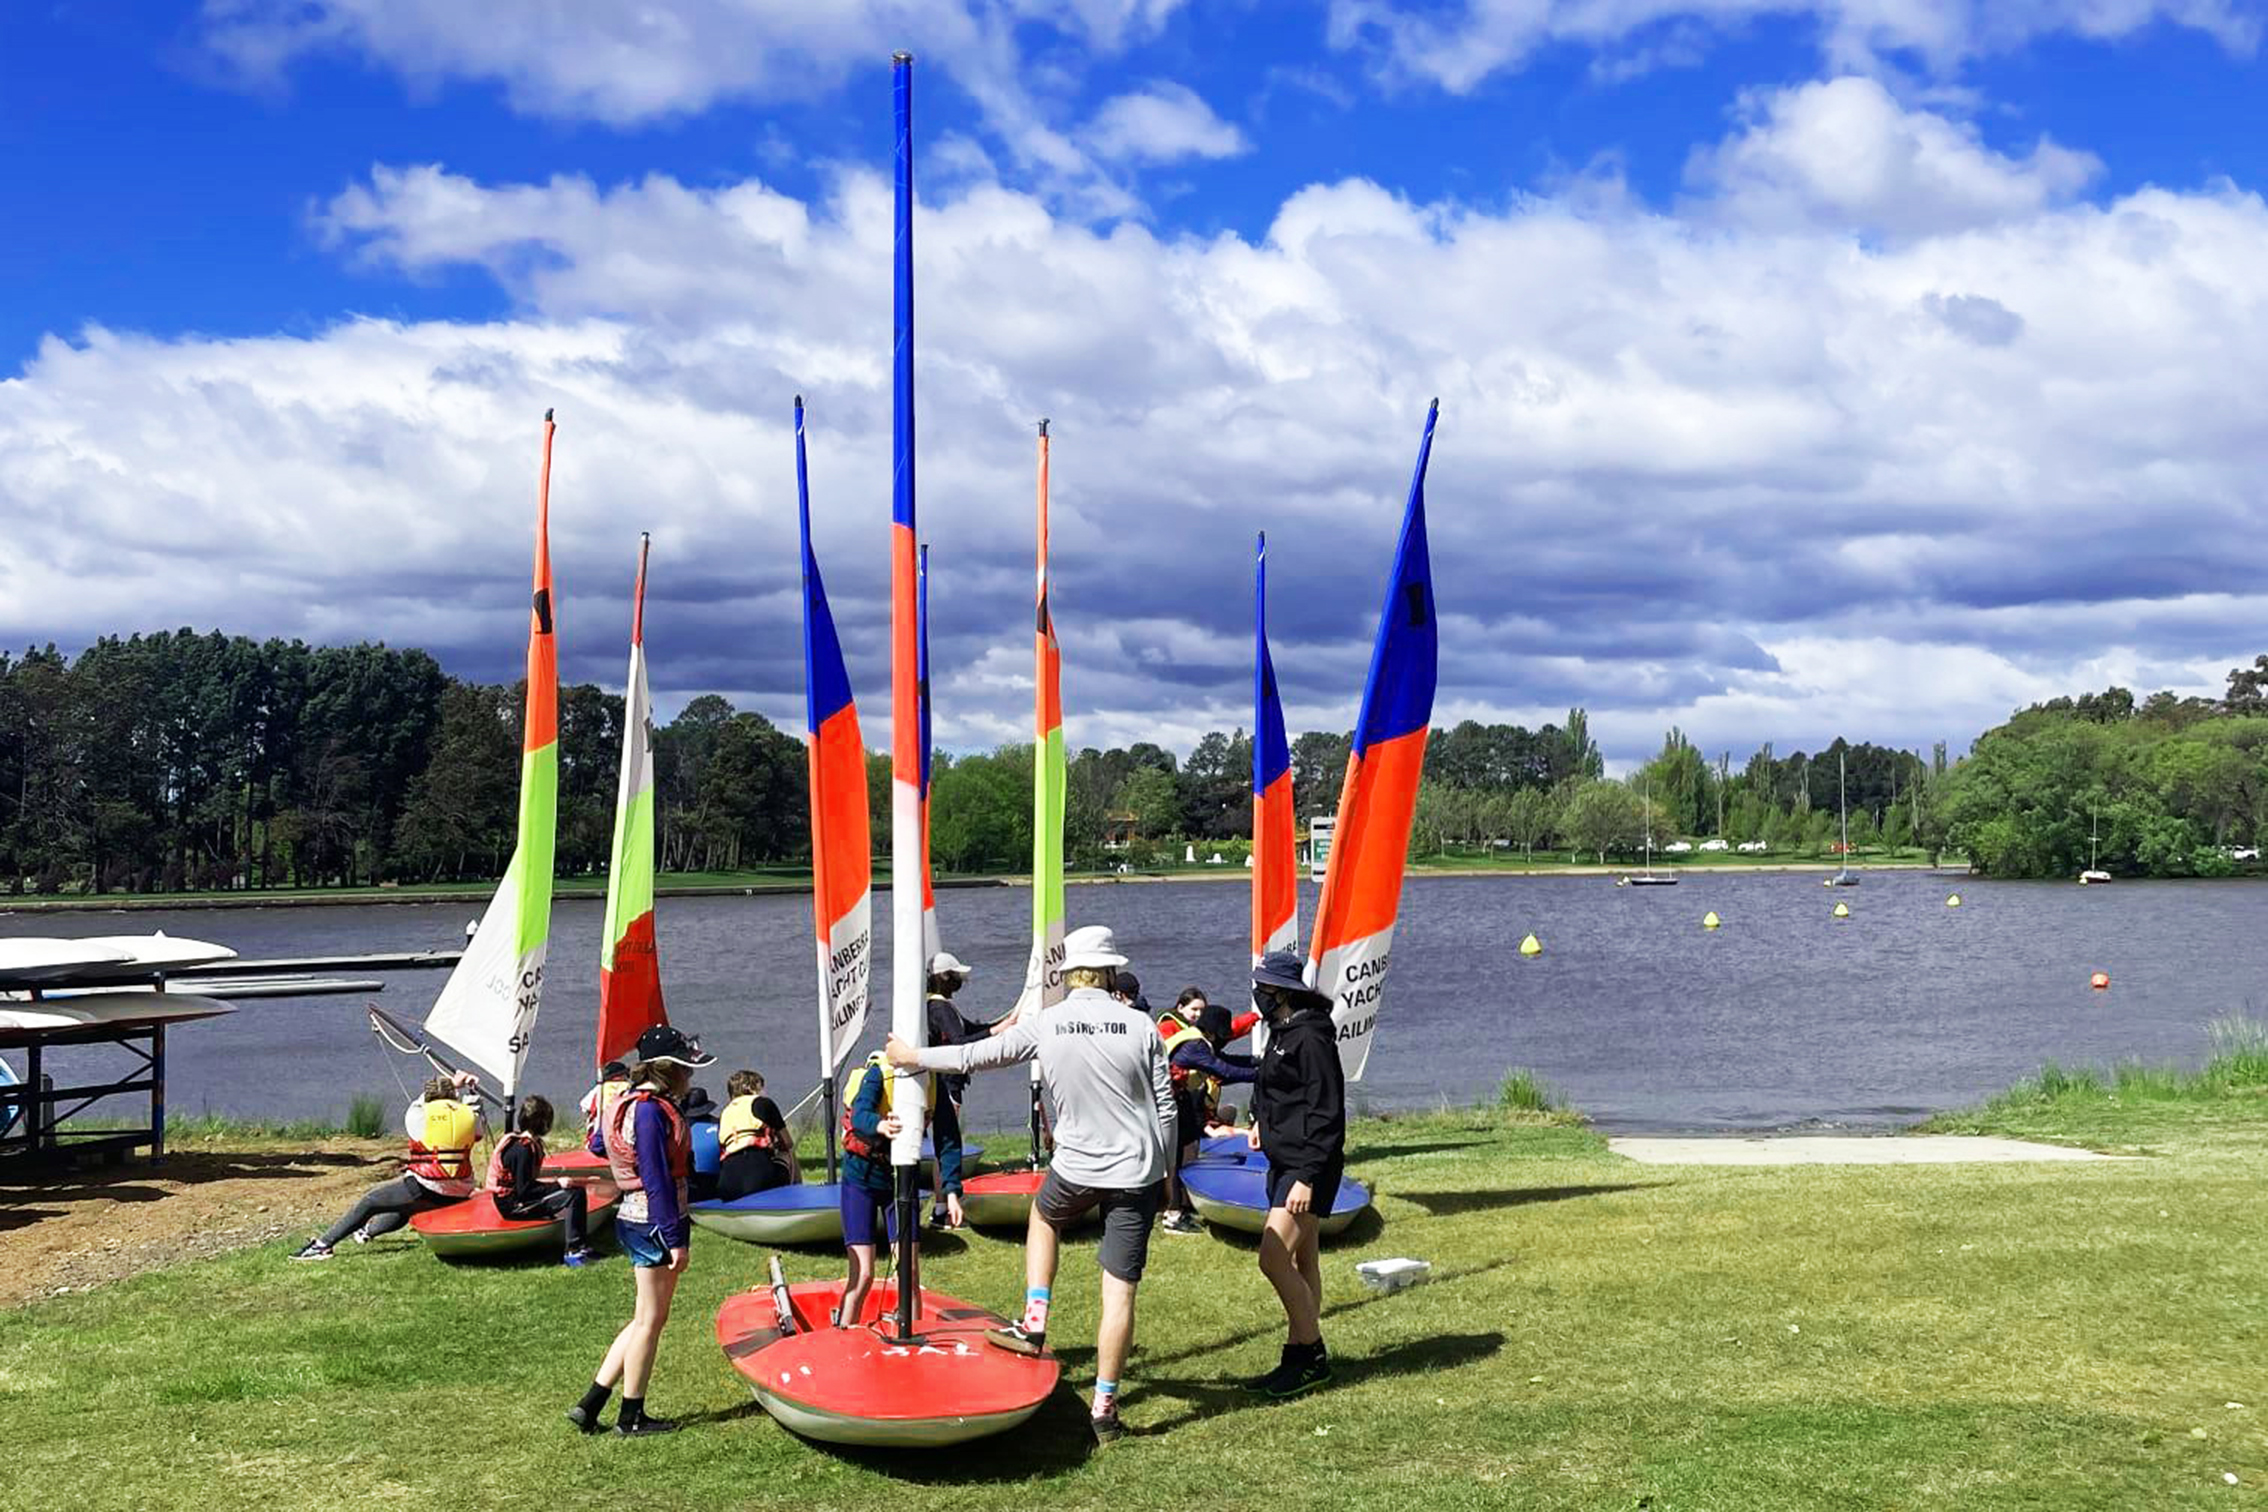 canberra yacht club boat hire